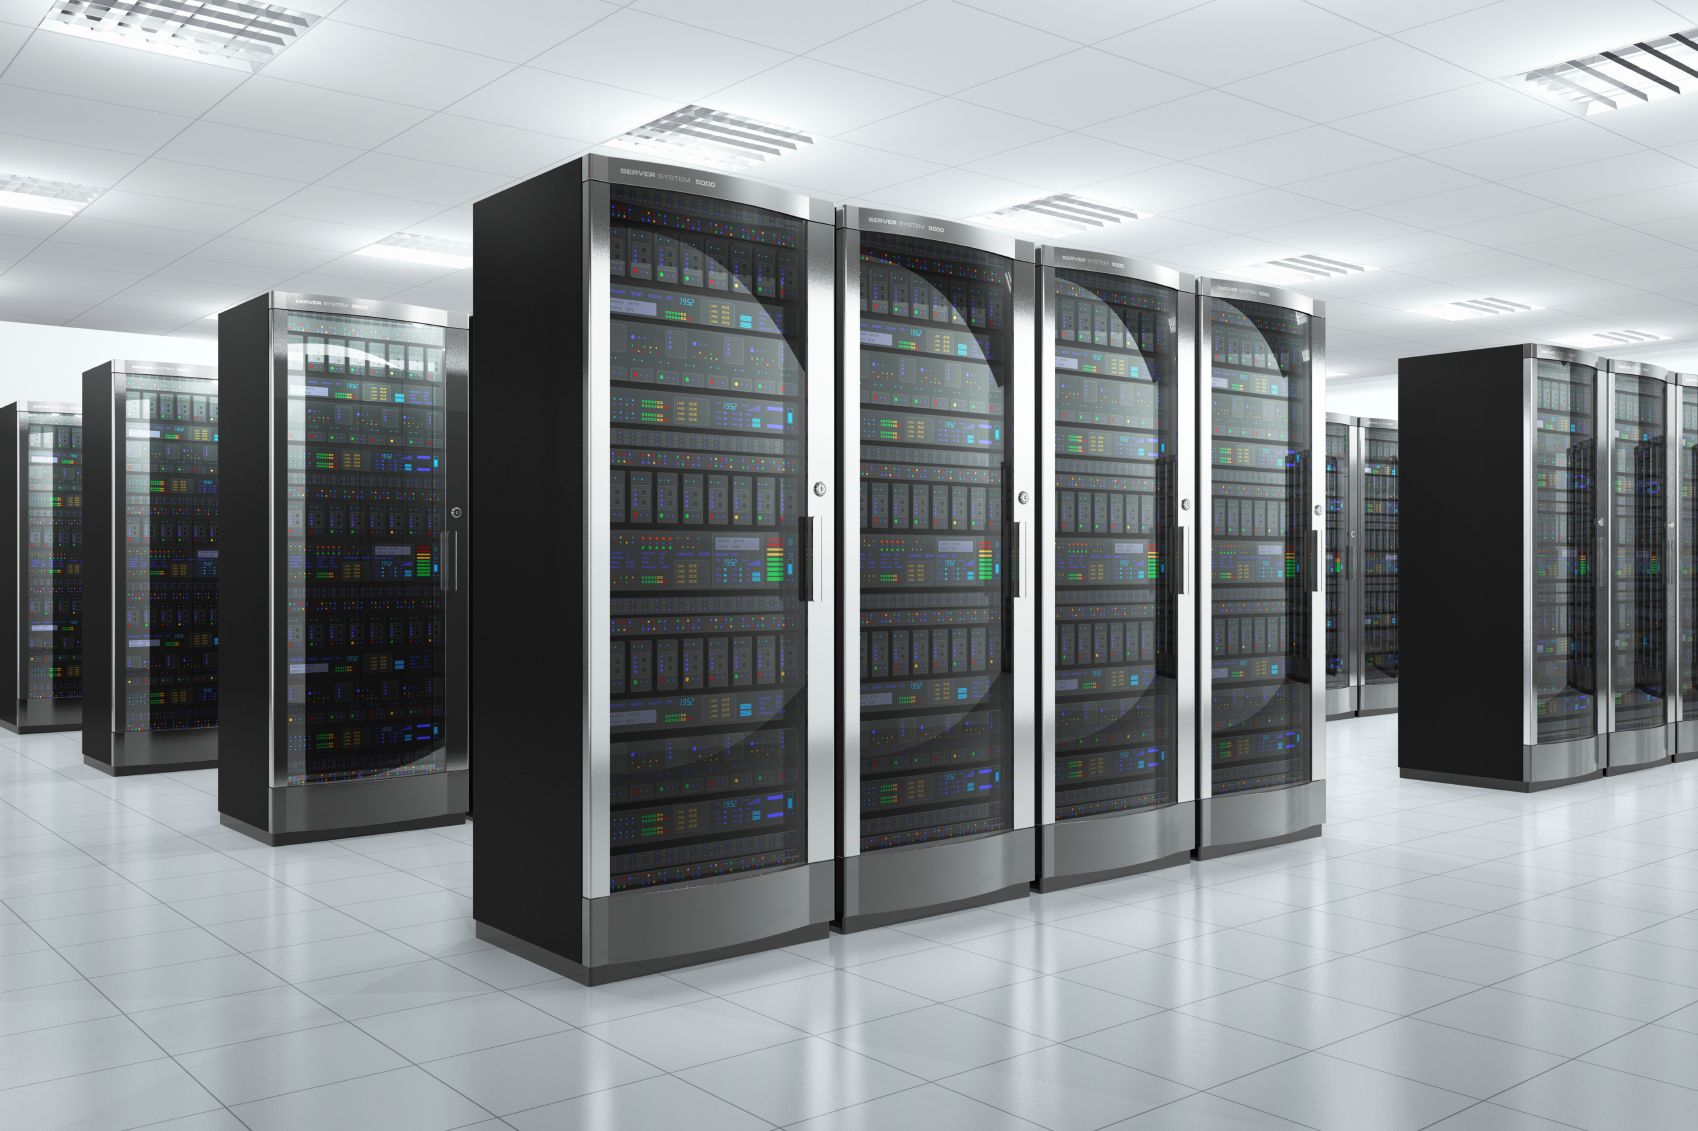 Critical Infrastructure Security in Data Centres